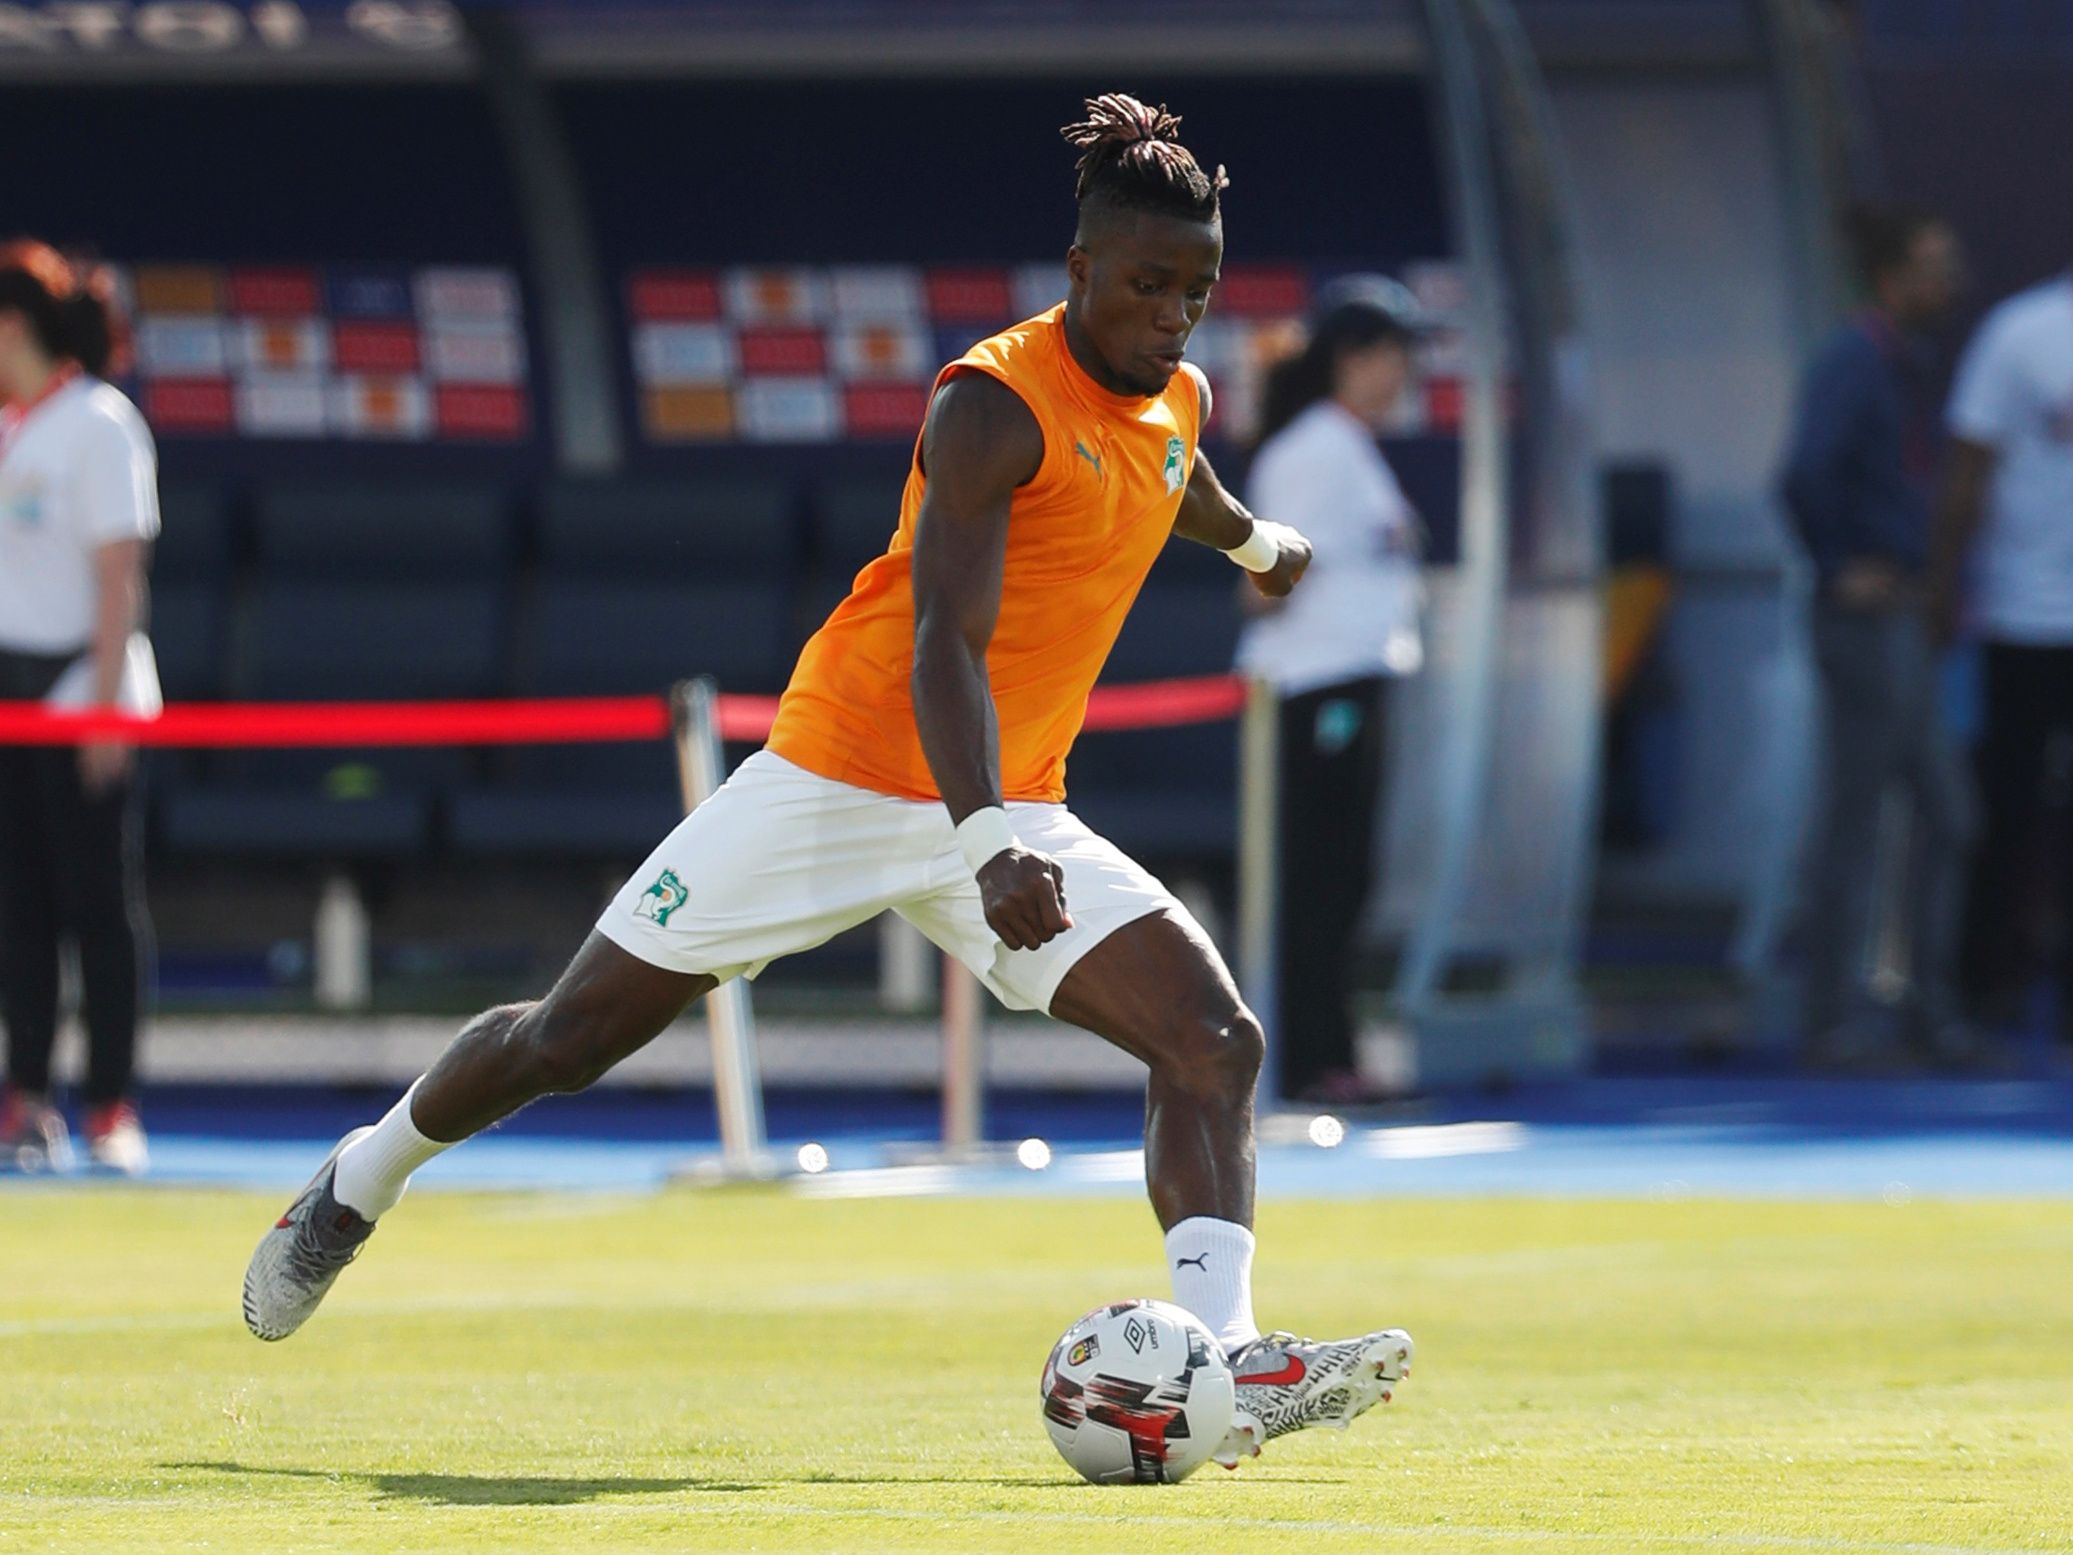 Soccer Football - Africa Cup of Nations 2019 - Group D - Ivory Coast v South Africa - Al Salam Stadium, Cairo, Egypt - June 24, 2019  Ivory Coast's Wilfried Zaha during the warm up before the match  REUTERS/Mohamed Abd El Ghany